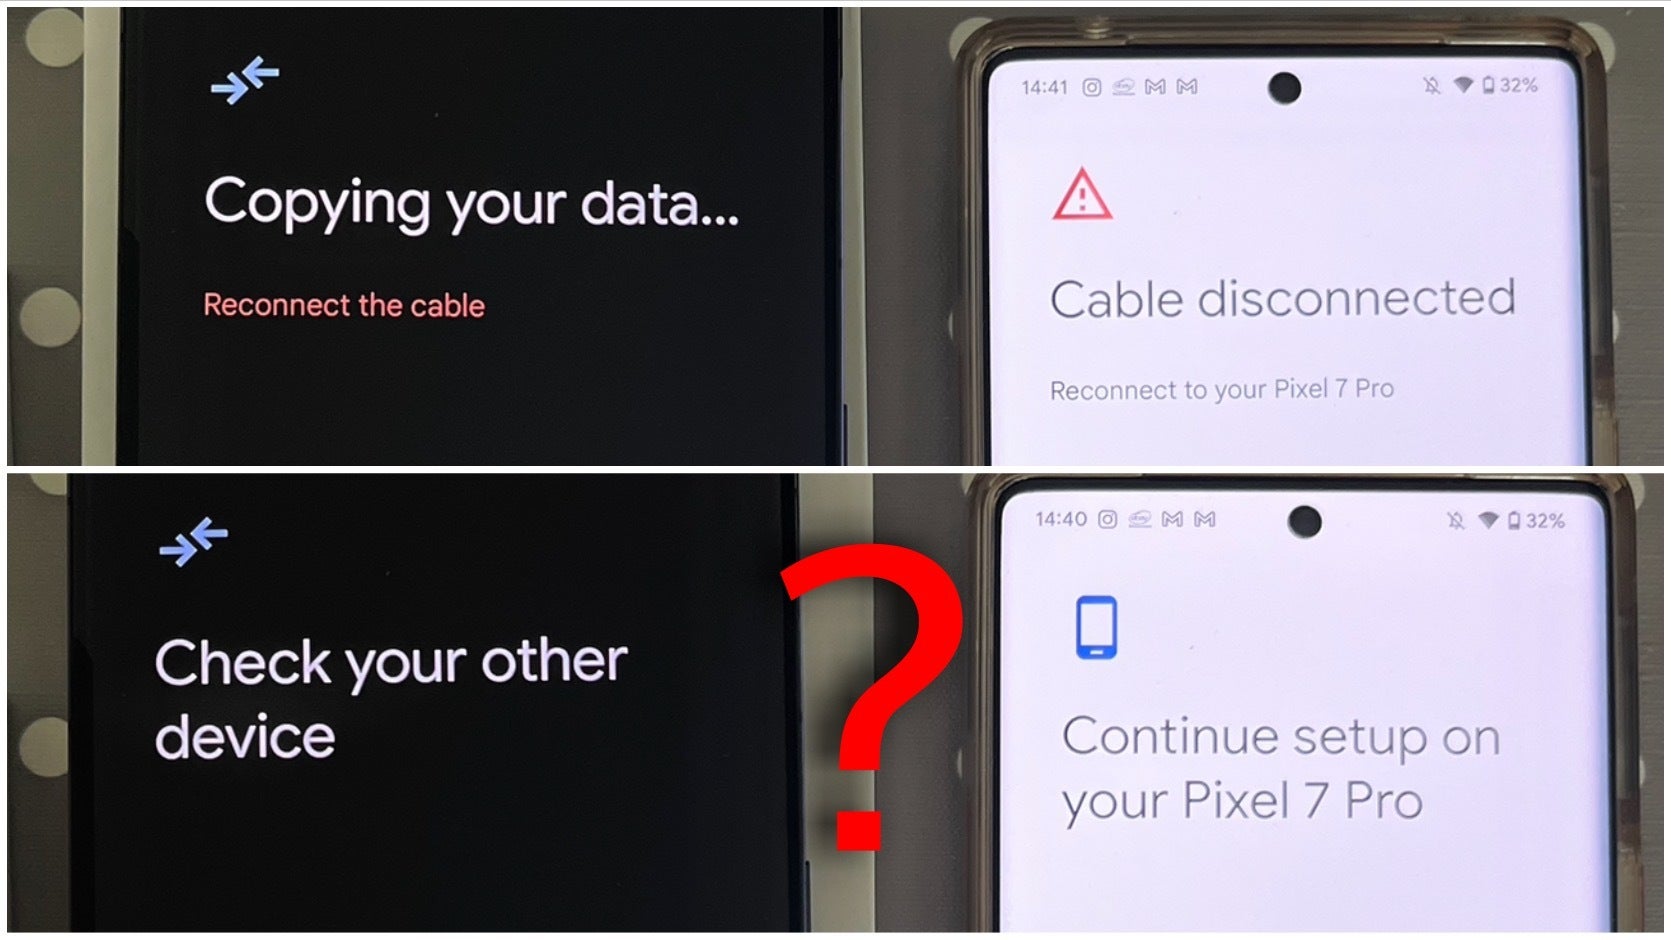 Pixel 6 and Pixel 7 fighting over who&#039;s wrong. - Android&#039;s iPhone? Next joke! Issues when switching to Pixel 7 make me rethink Google&#039;s promises